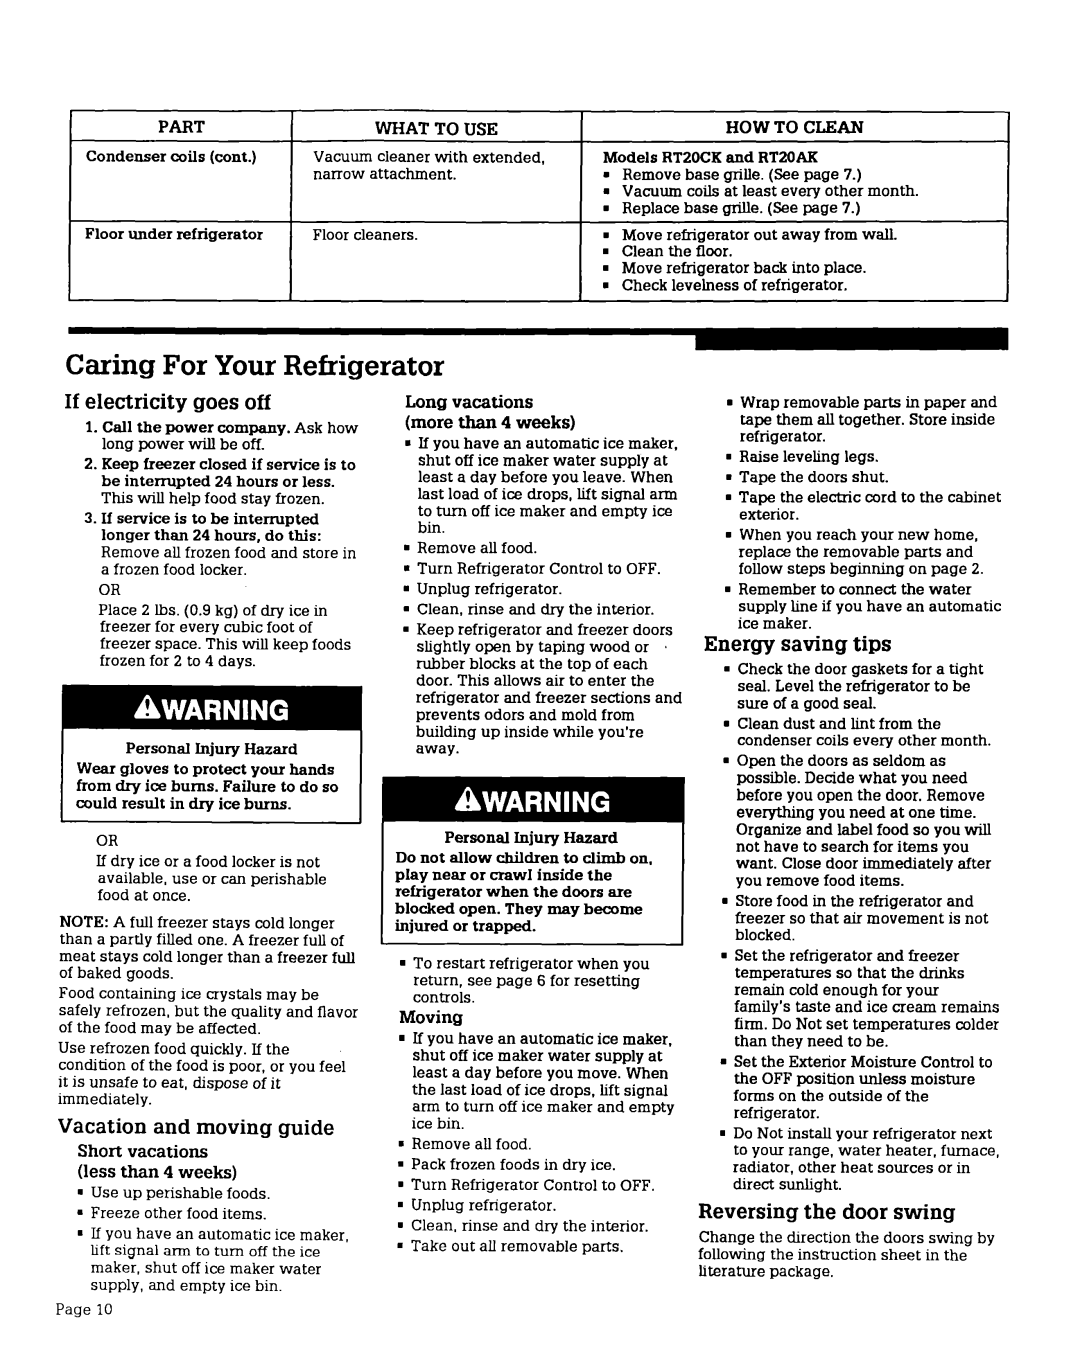 Whirlpool RT14DM manual Caring For Your Refrigerator, If electricity goesoff, Energy saving tips, Reversing the door swing 